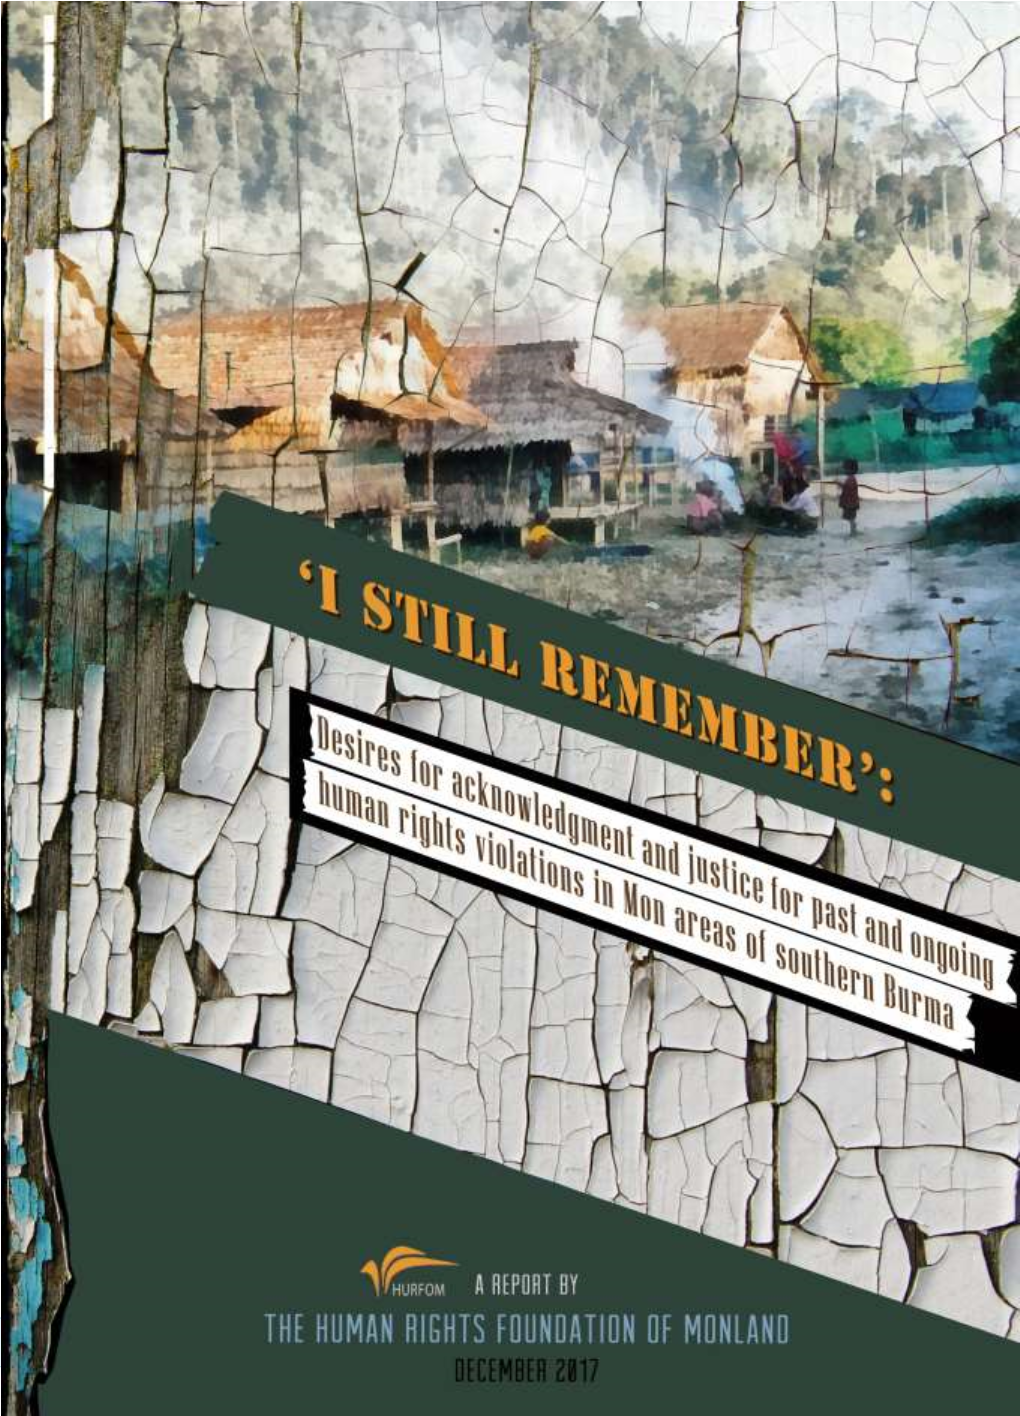 I Still Remember': Desires for Acknowledgment and Justice for Past and Ongoing Human Rights Violations in Mon Areas of Southern Burma